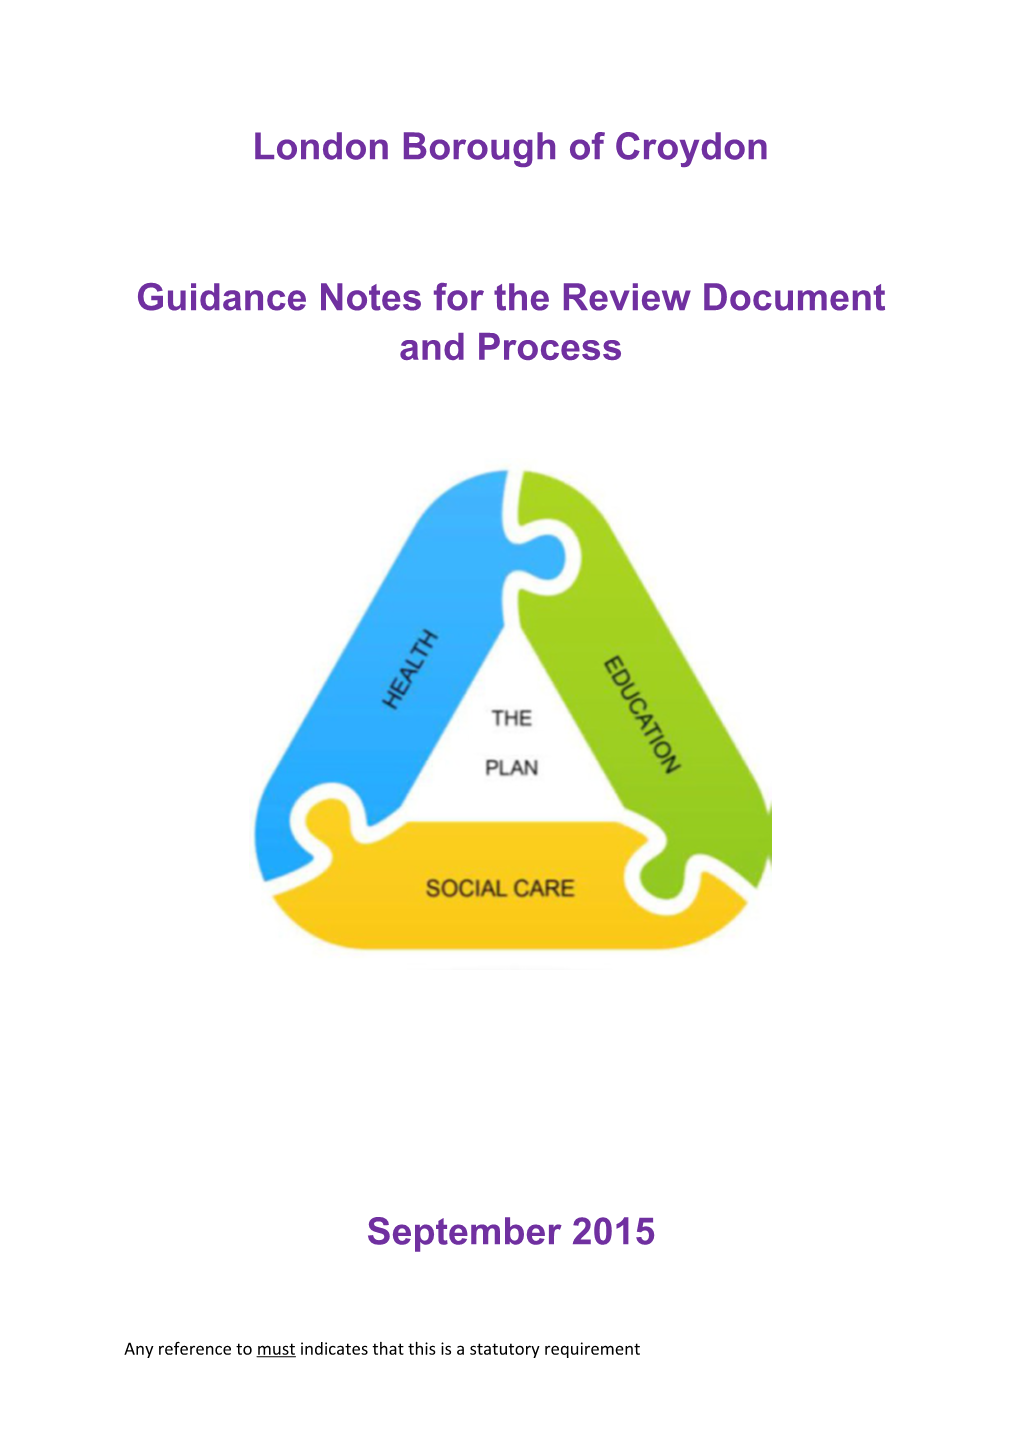 Guidance Notes for Thereview Document and Process